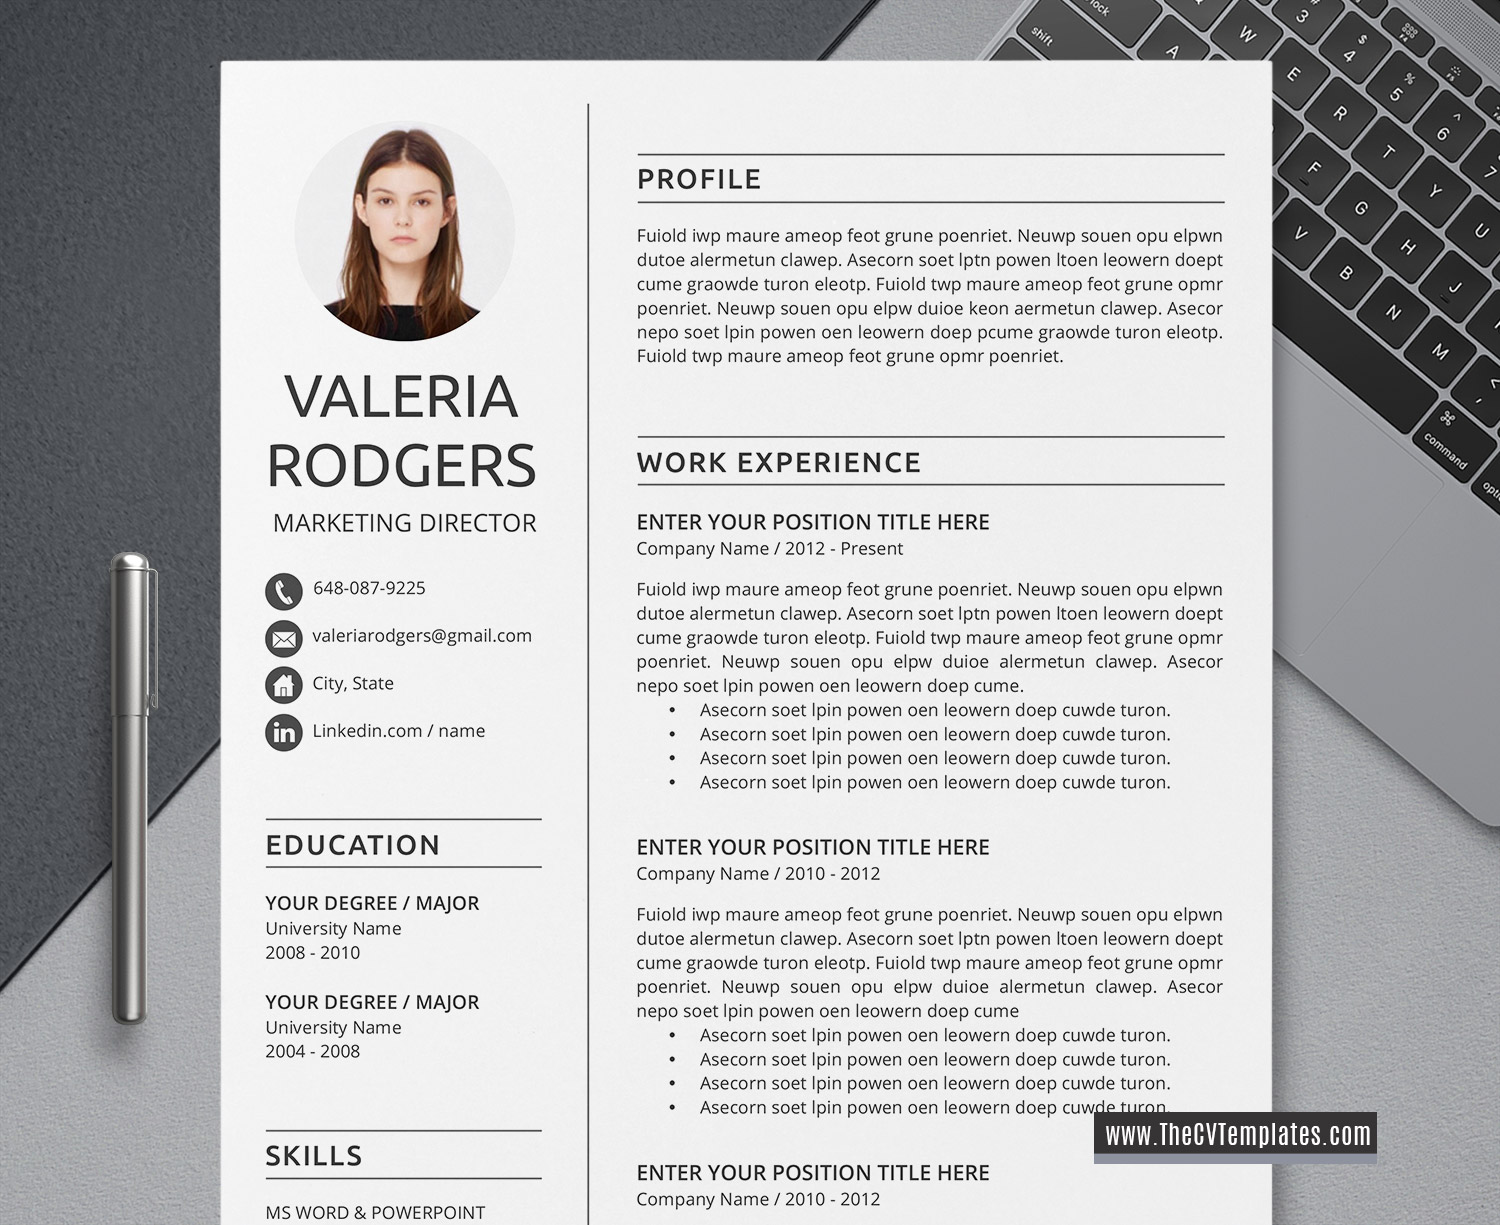 Microsoft Word Cv Template from www.thecvtemplates.com